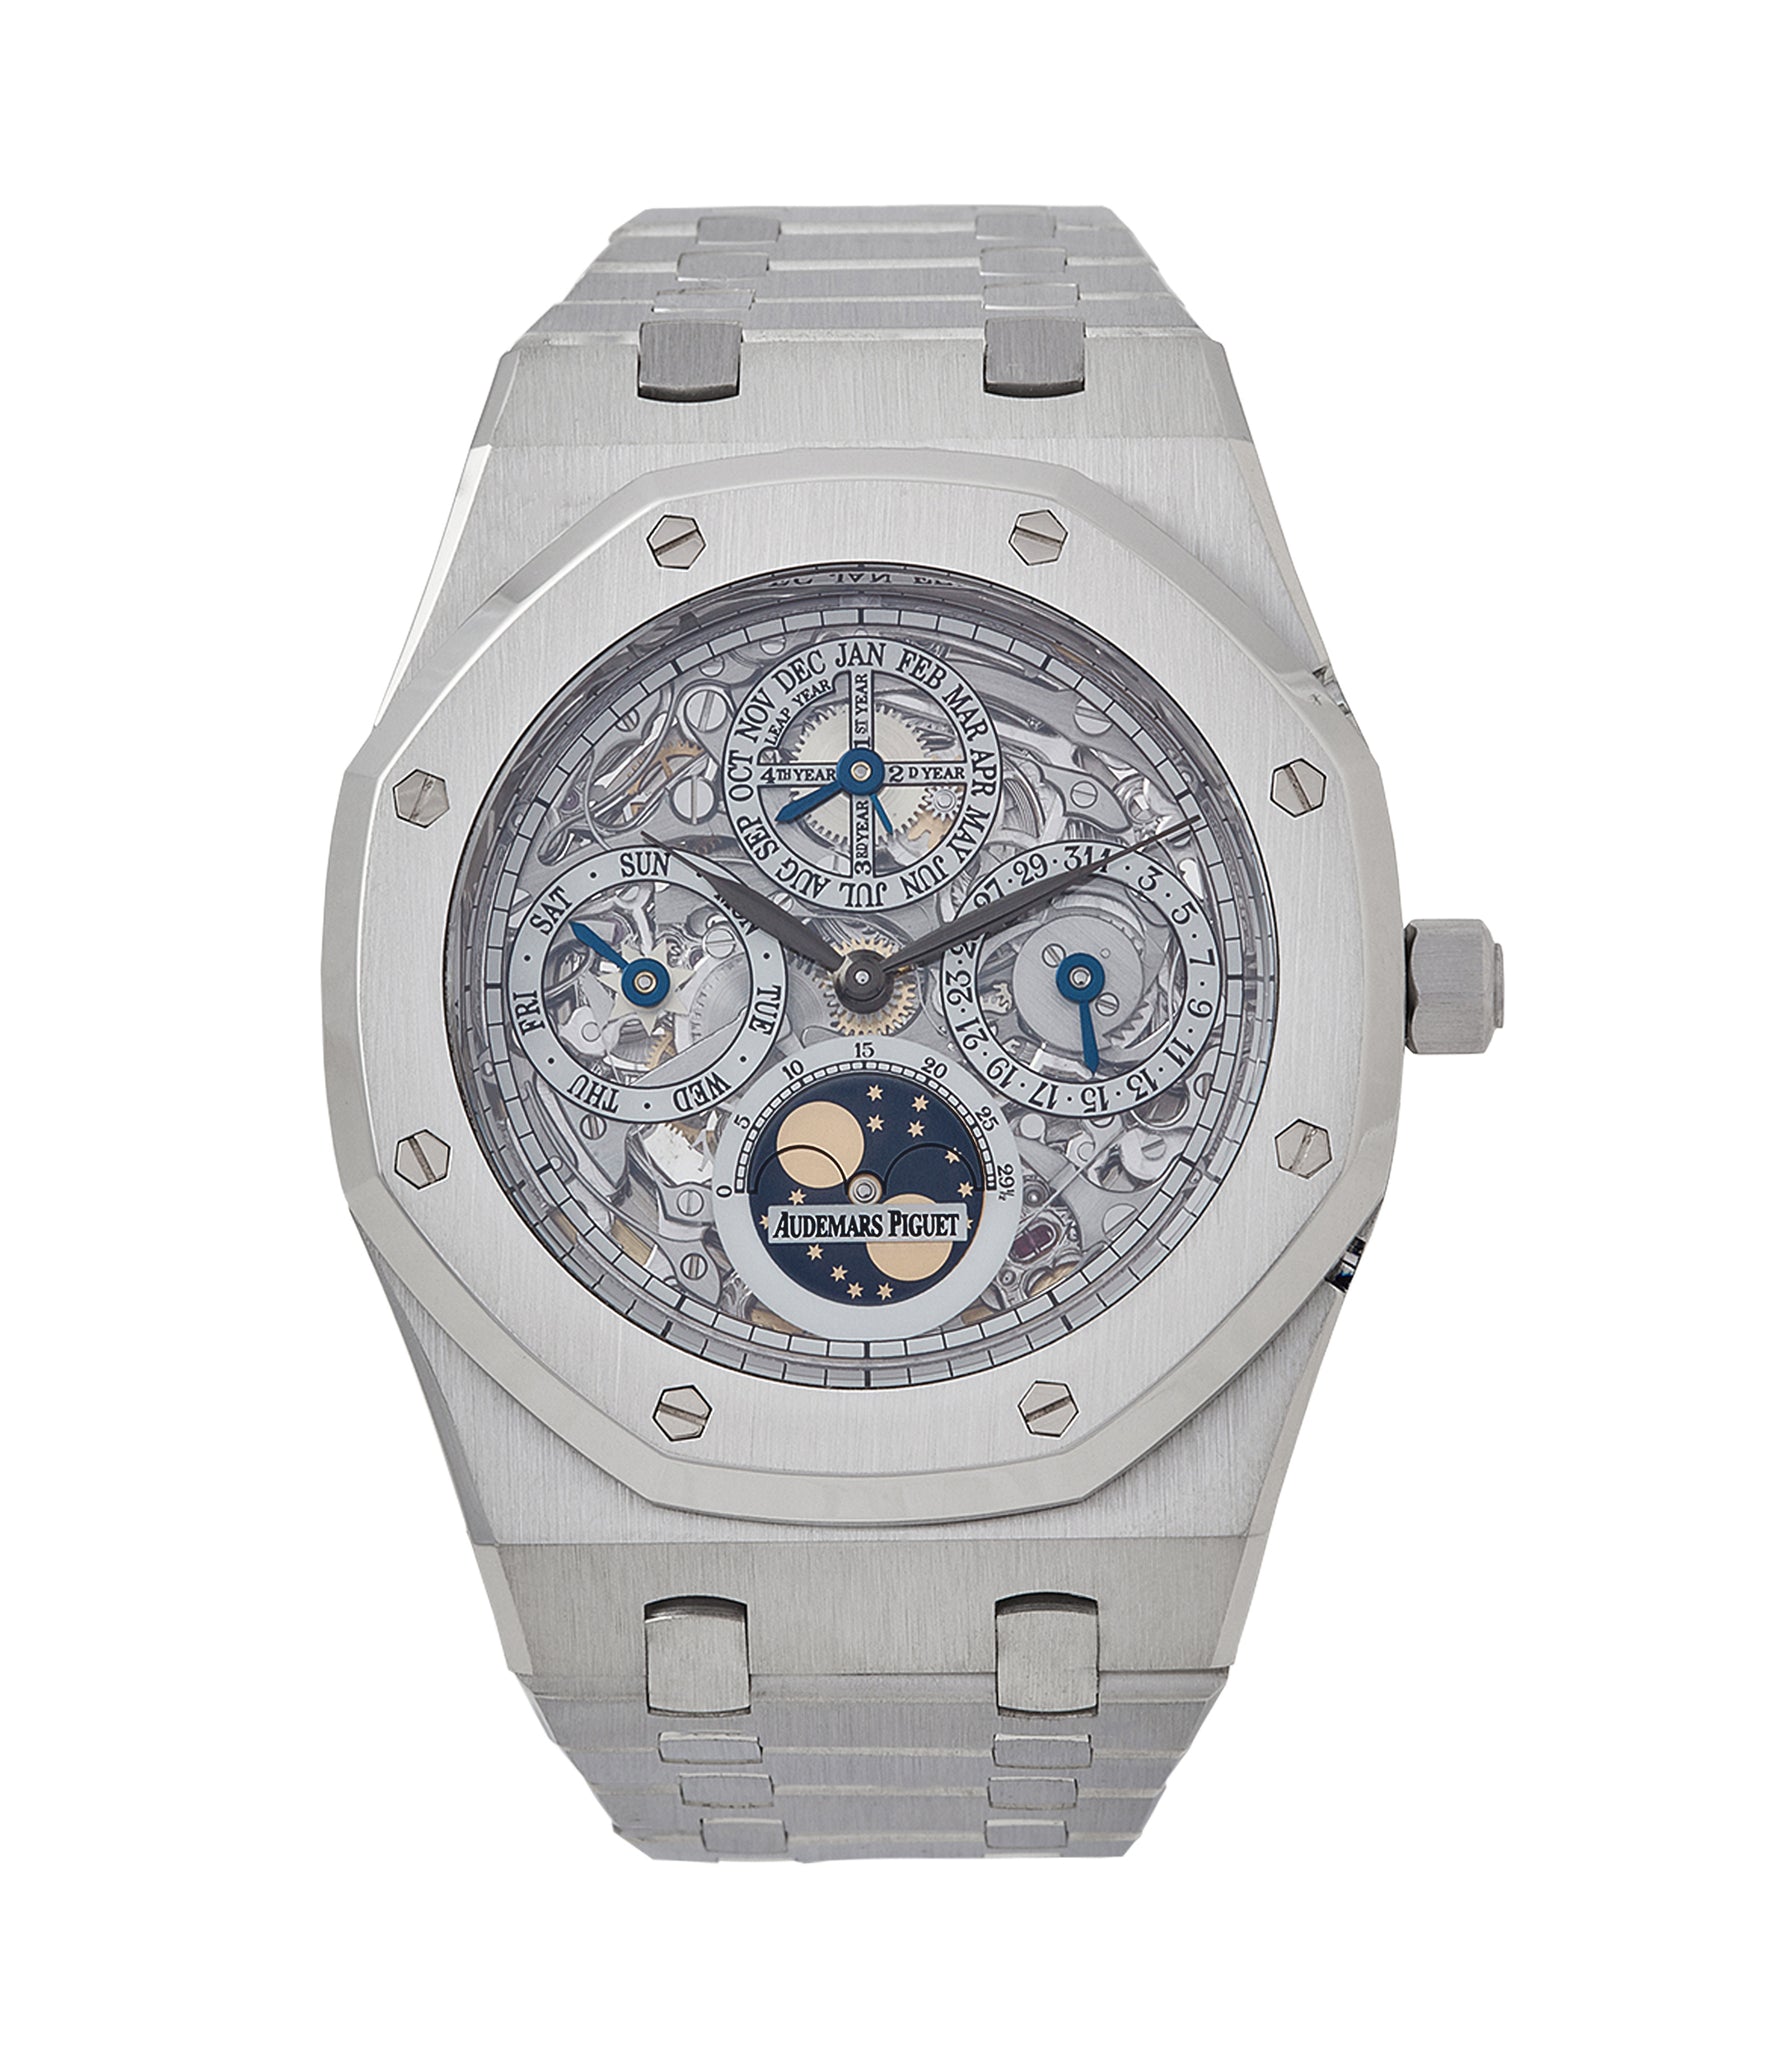 buy Audemars Piguet Royal Oak 25829PT perpetual calendar skeleton dial platinum full set pre-owned watch for sale online at A Collected Man London UK specialist of rare watches